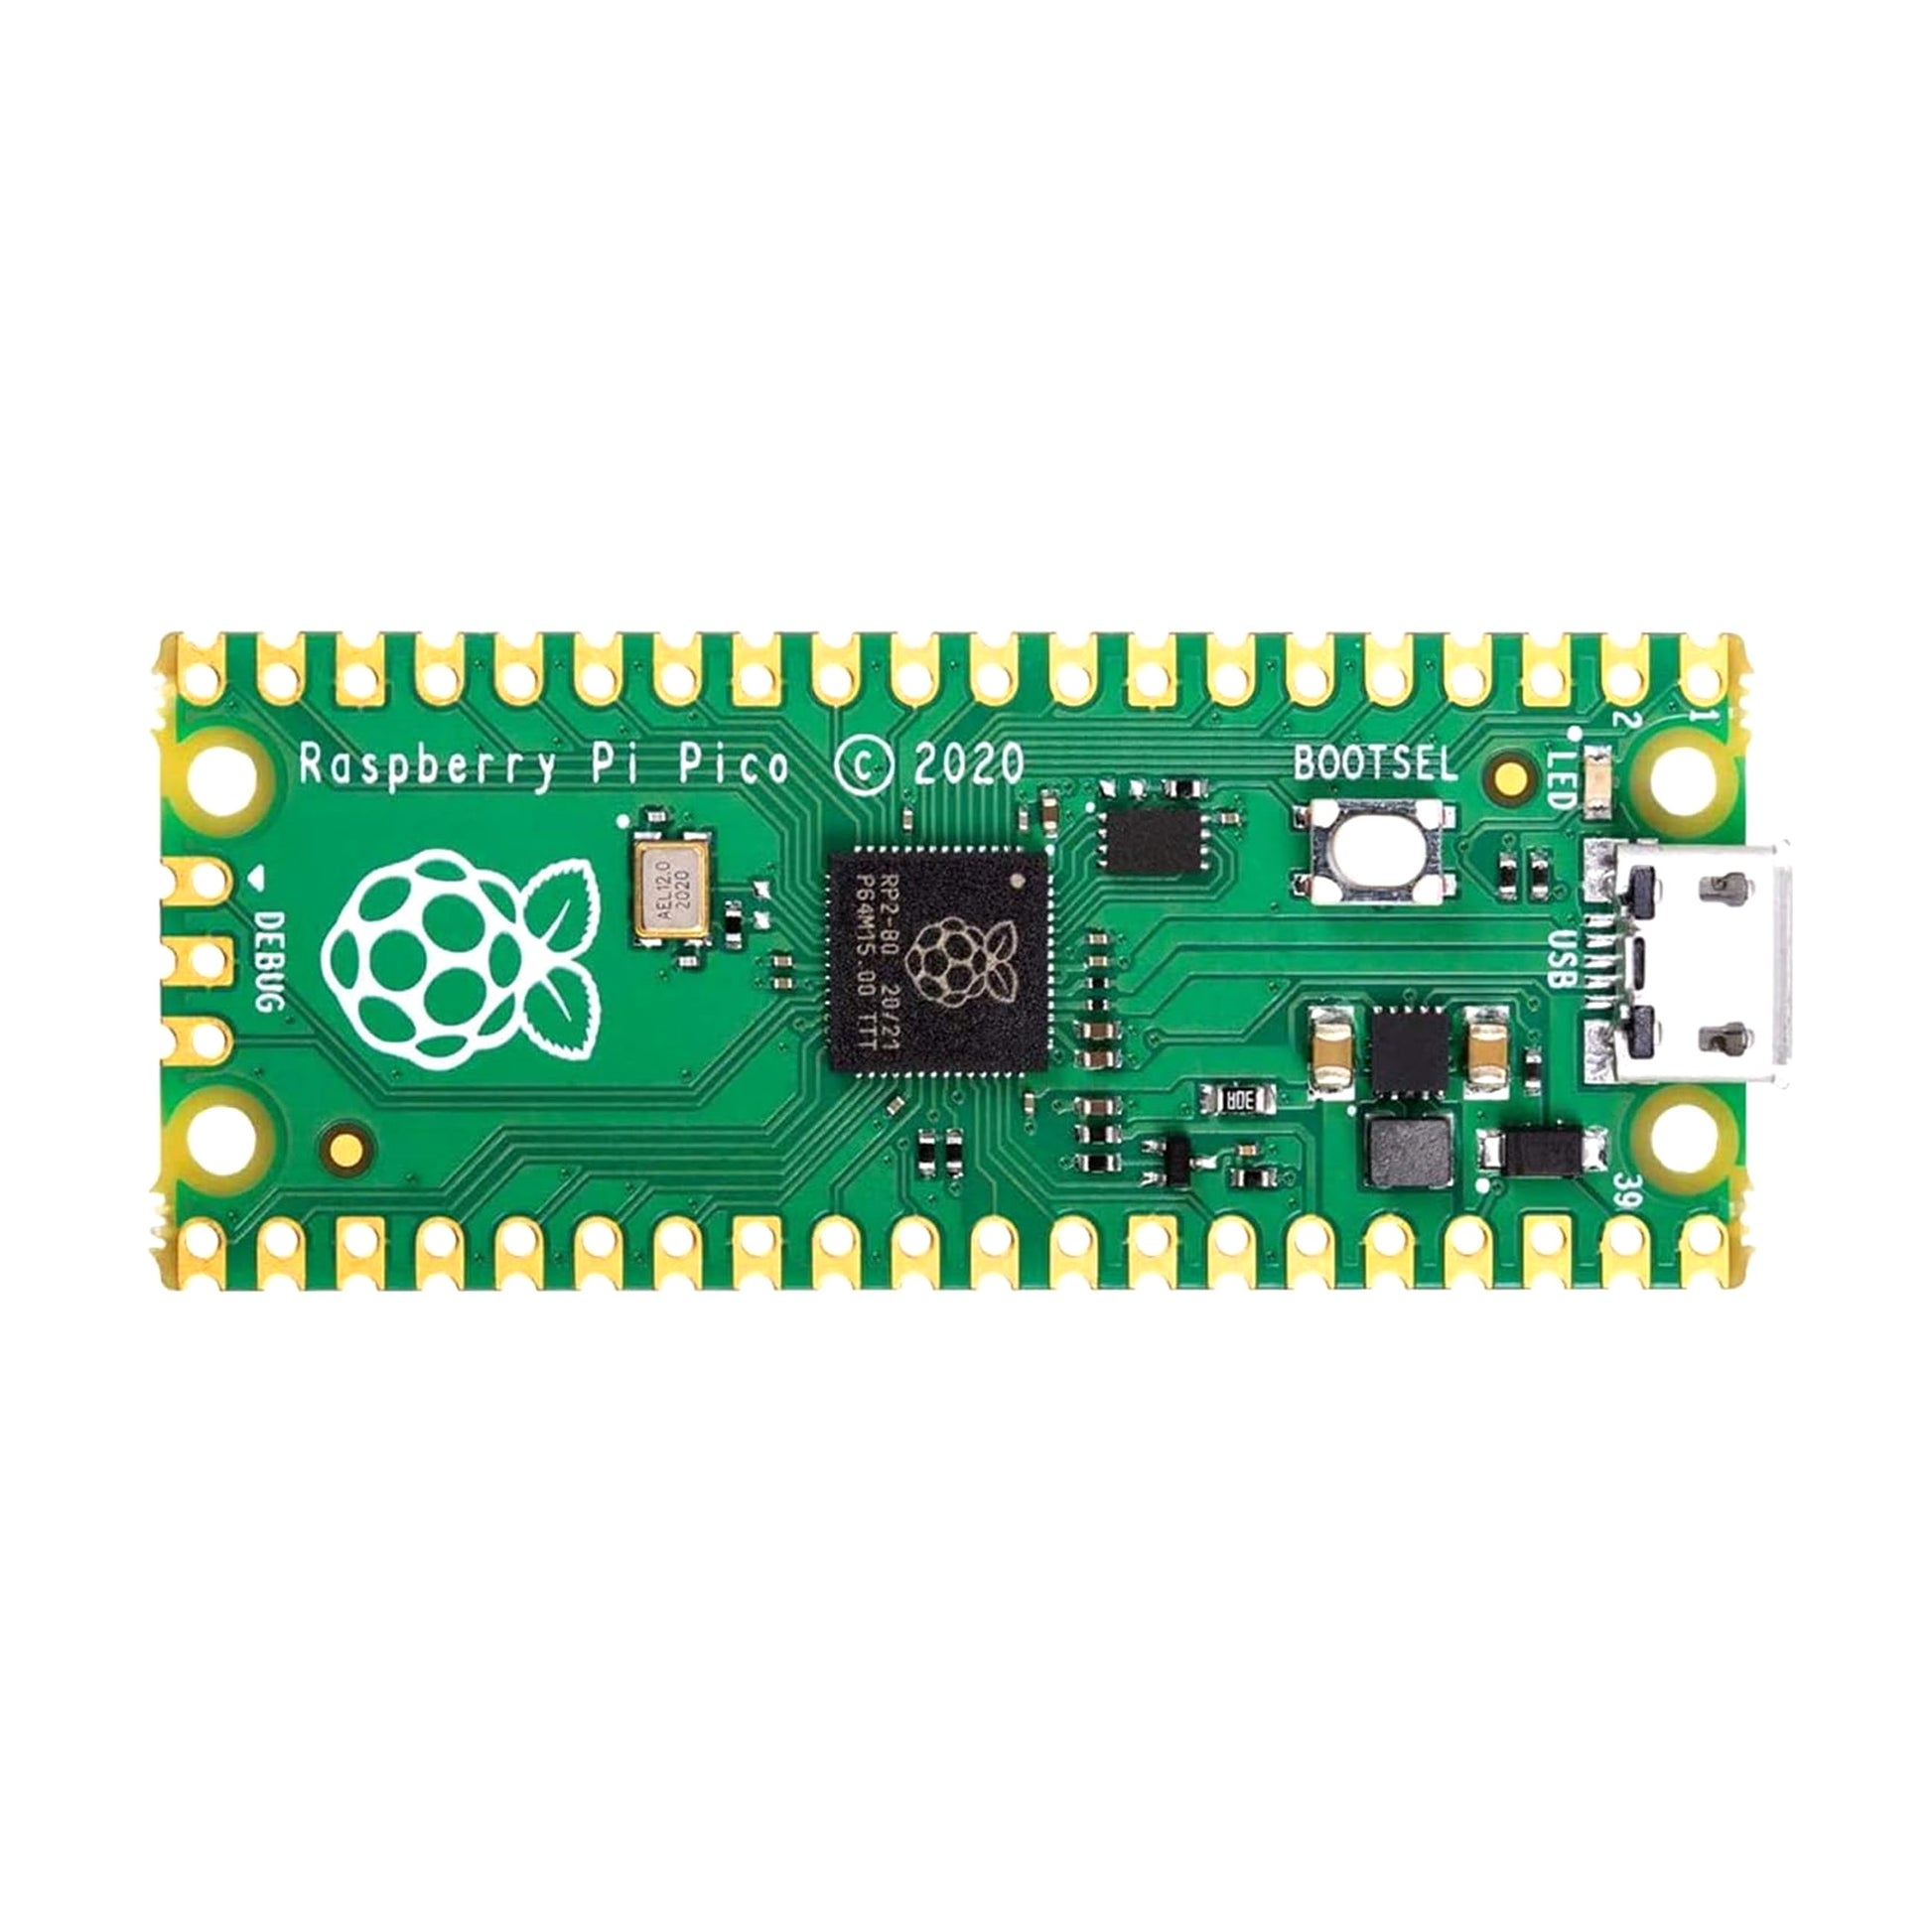 Raspberry Pi Pico Microcontroller Development Board with Versatile Board Built Using RP2040 Chip - RS2650/RS4911 - REES52